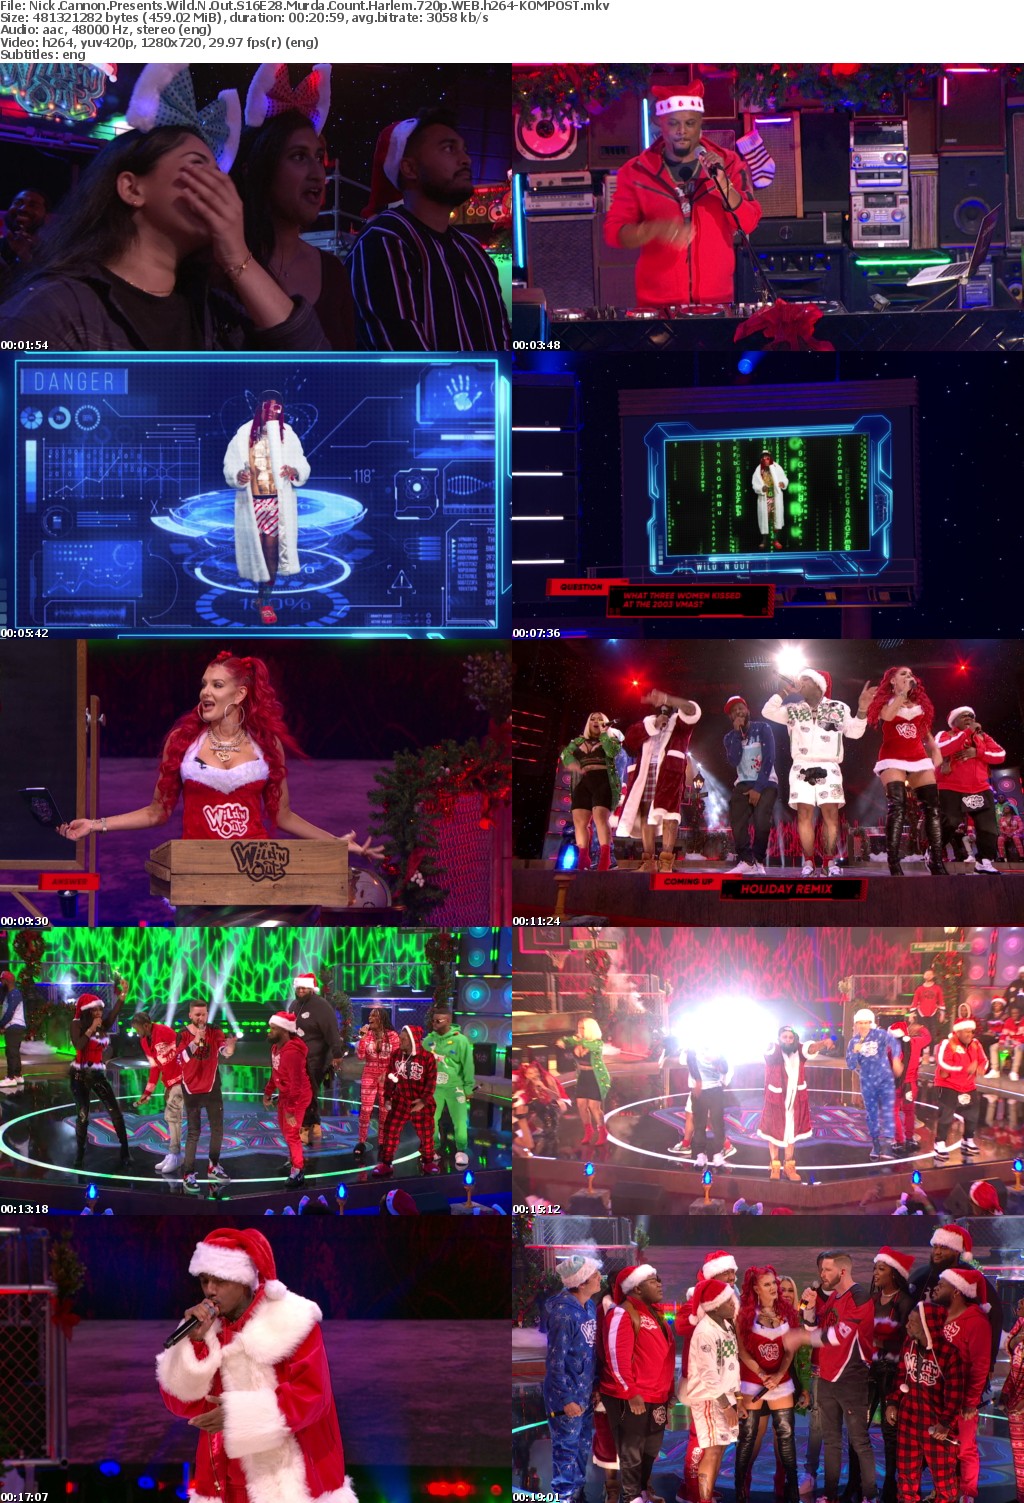 Nick Cannon Presents Wild N Out S16E28 Murda Count Harlem 720p WEB h264-KOMPOST